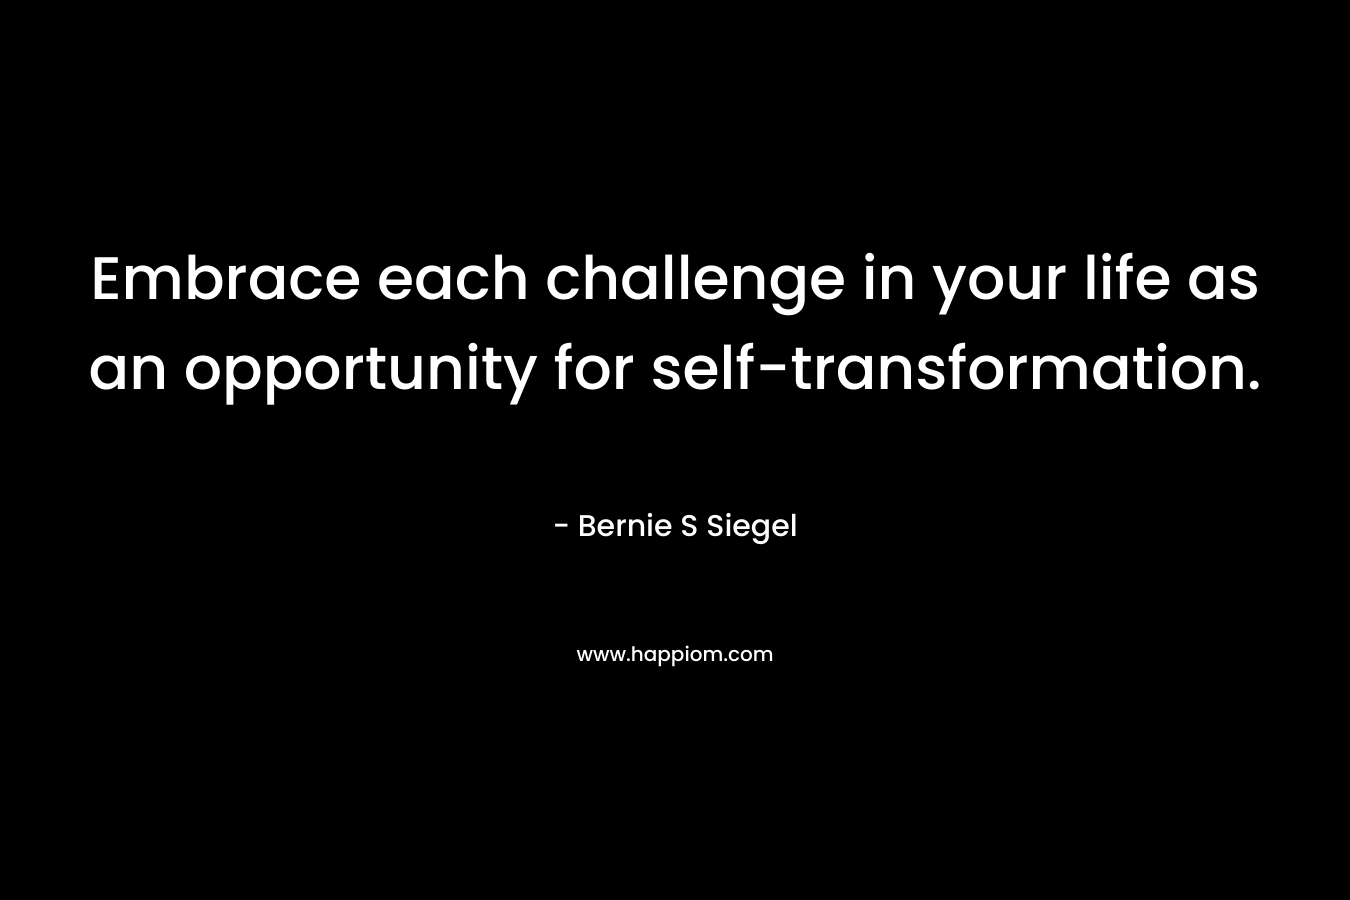 Embrace each challenge in your life as an opportunity for self-transformation.